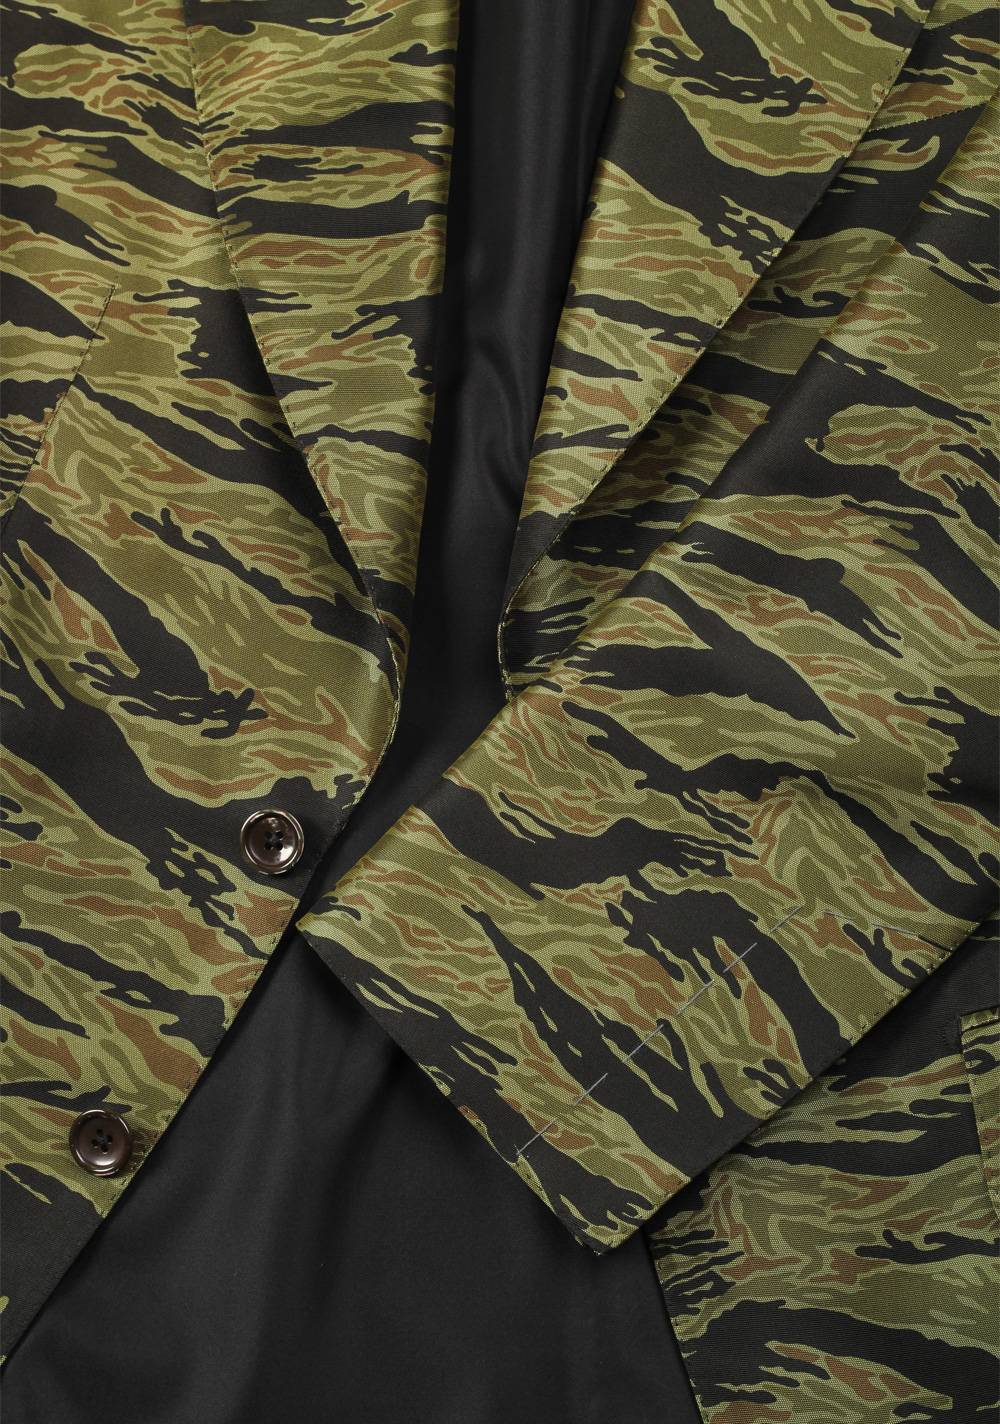 TOM FORD Atticus Green Camouflage Silk Sport Coat | Costume Limité